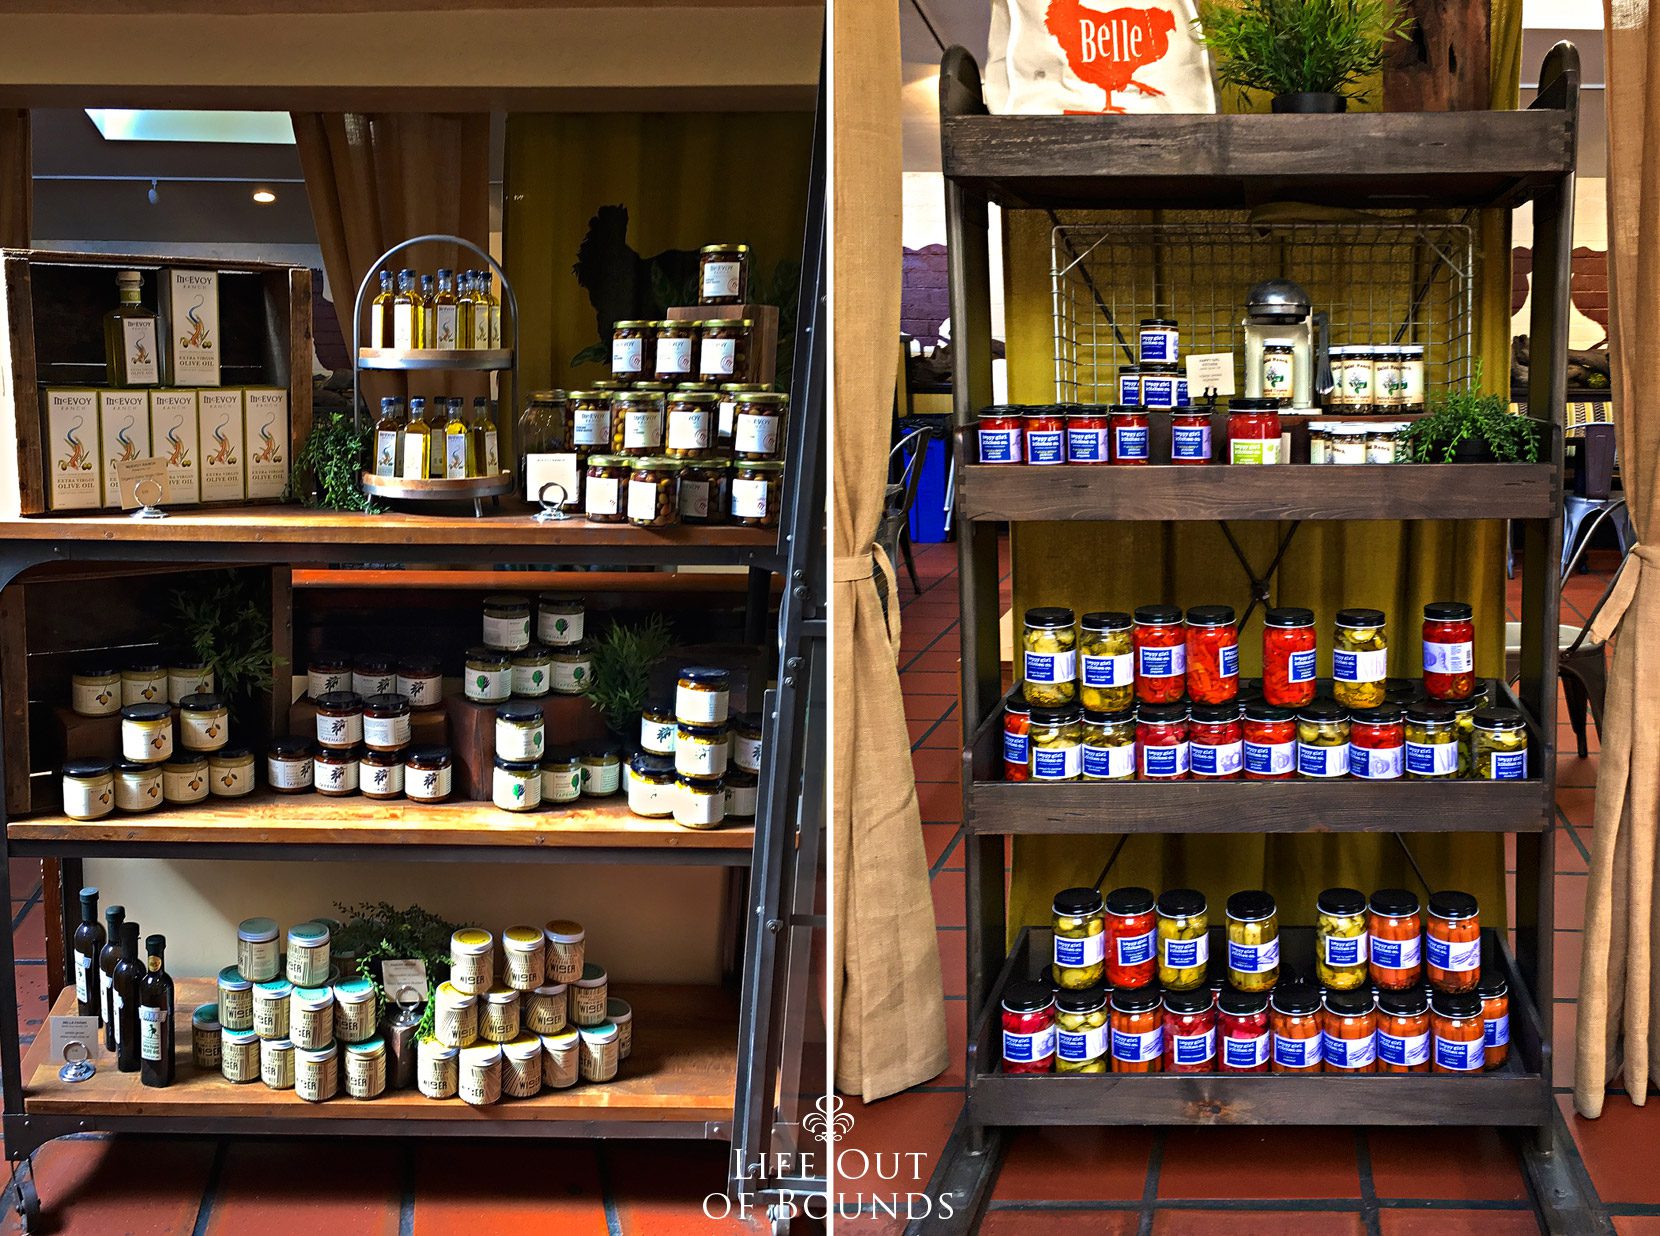 Specialty-foods-at-Carmel-Belle-cafe-in-Carmel-by-the-Sea-California